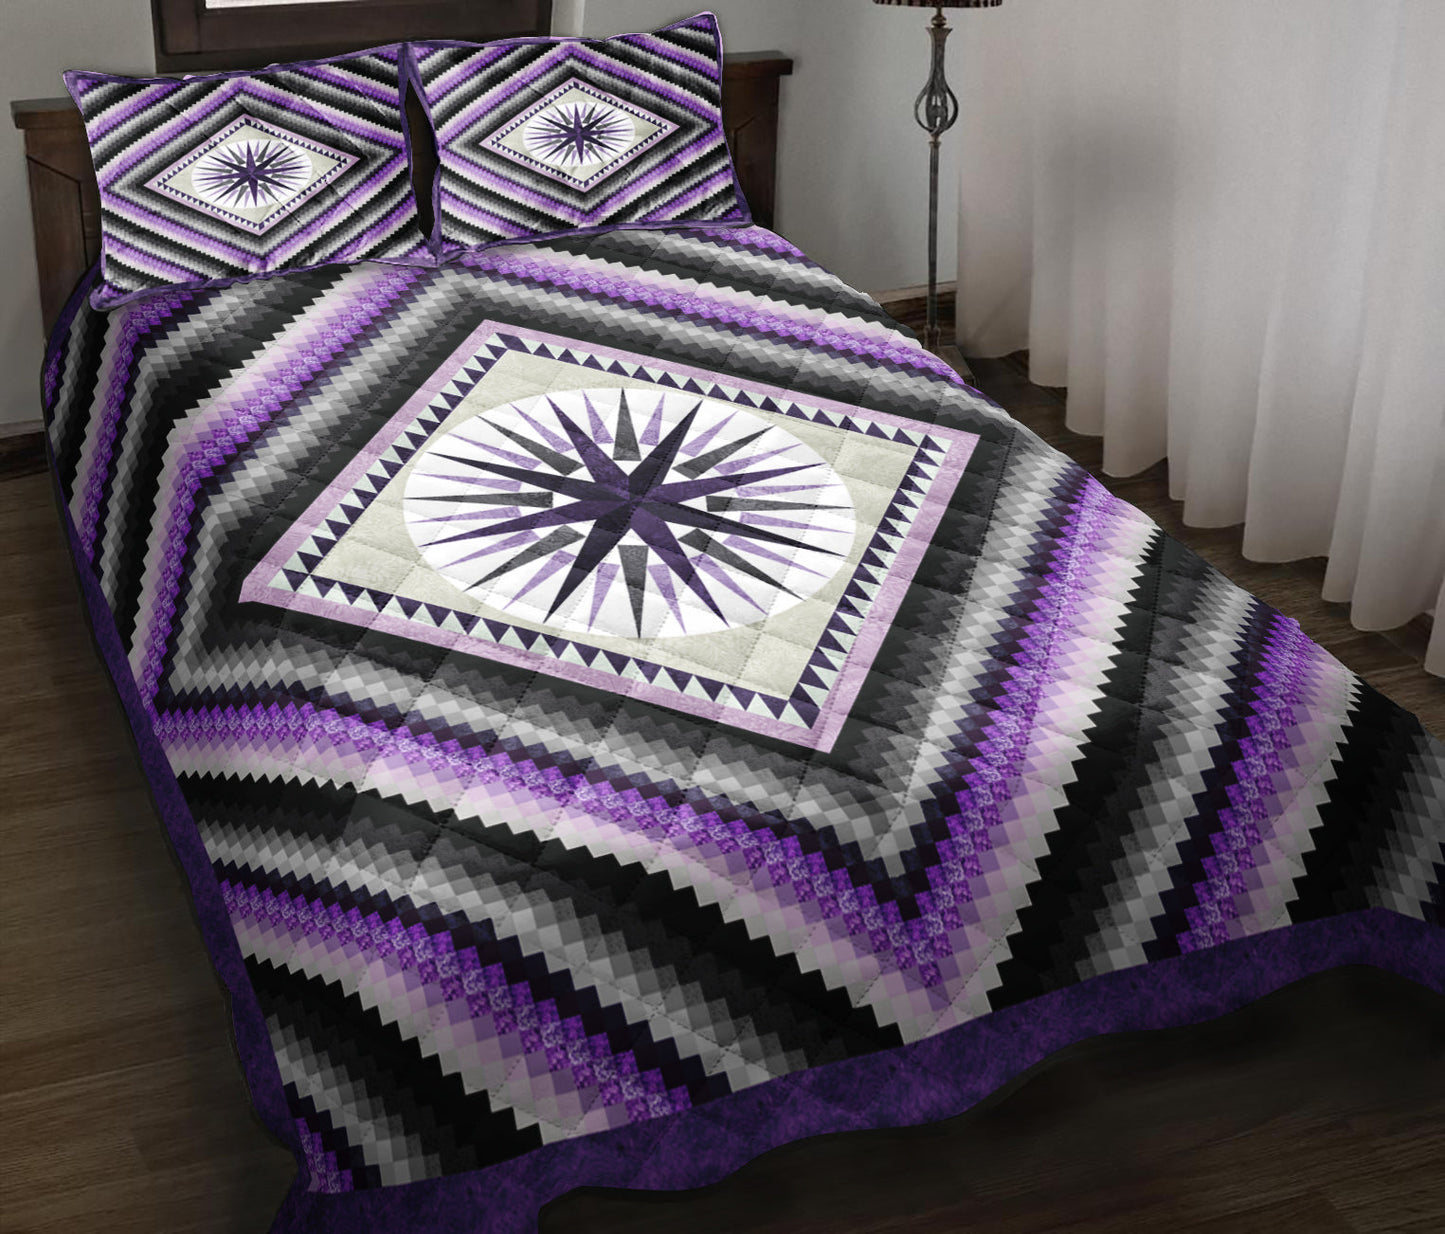 Native Star Quilt Bed Sheet MT300503ABS